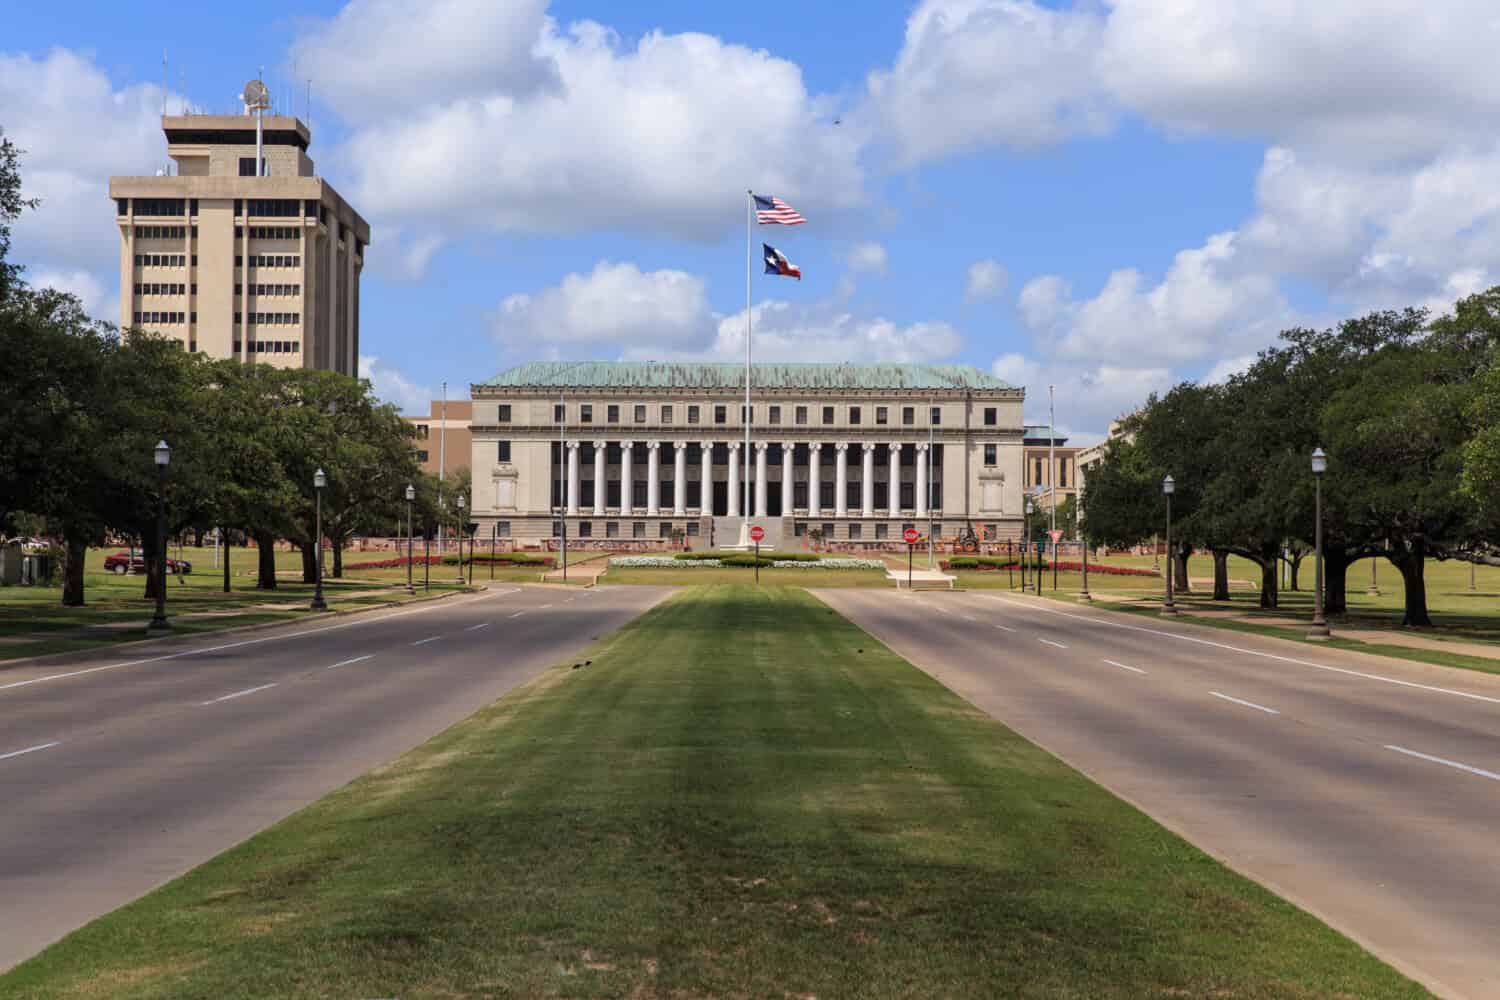 The main entrance to Texas A & M University with the Jack K. Williams Systems Administration building at the end of road in College Station, Texas